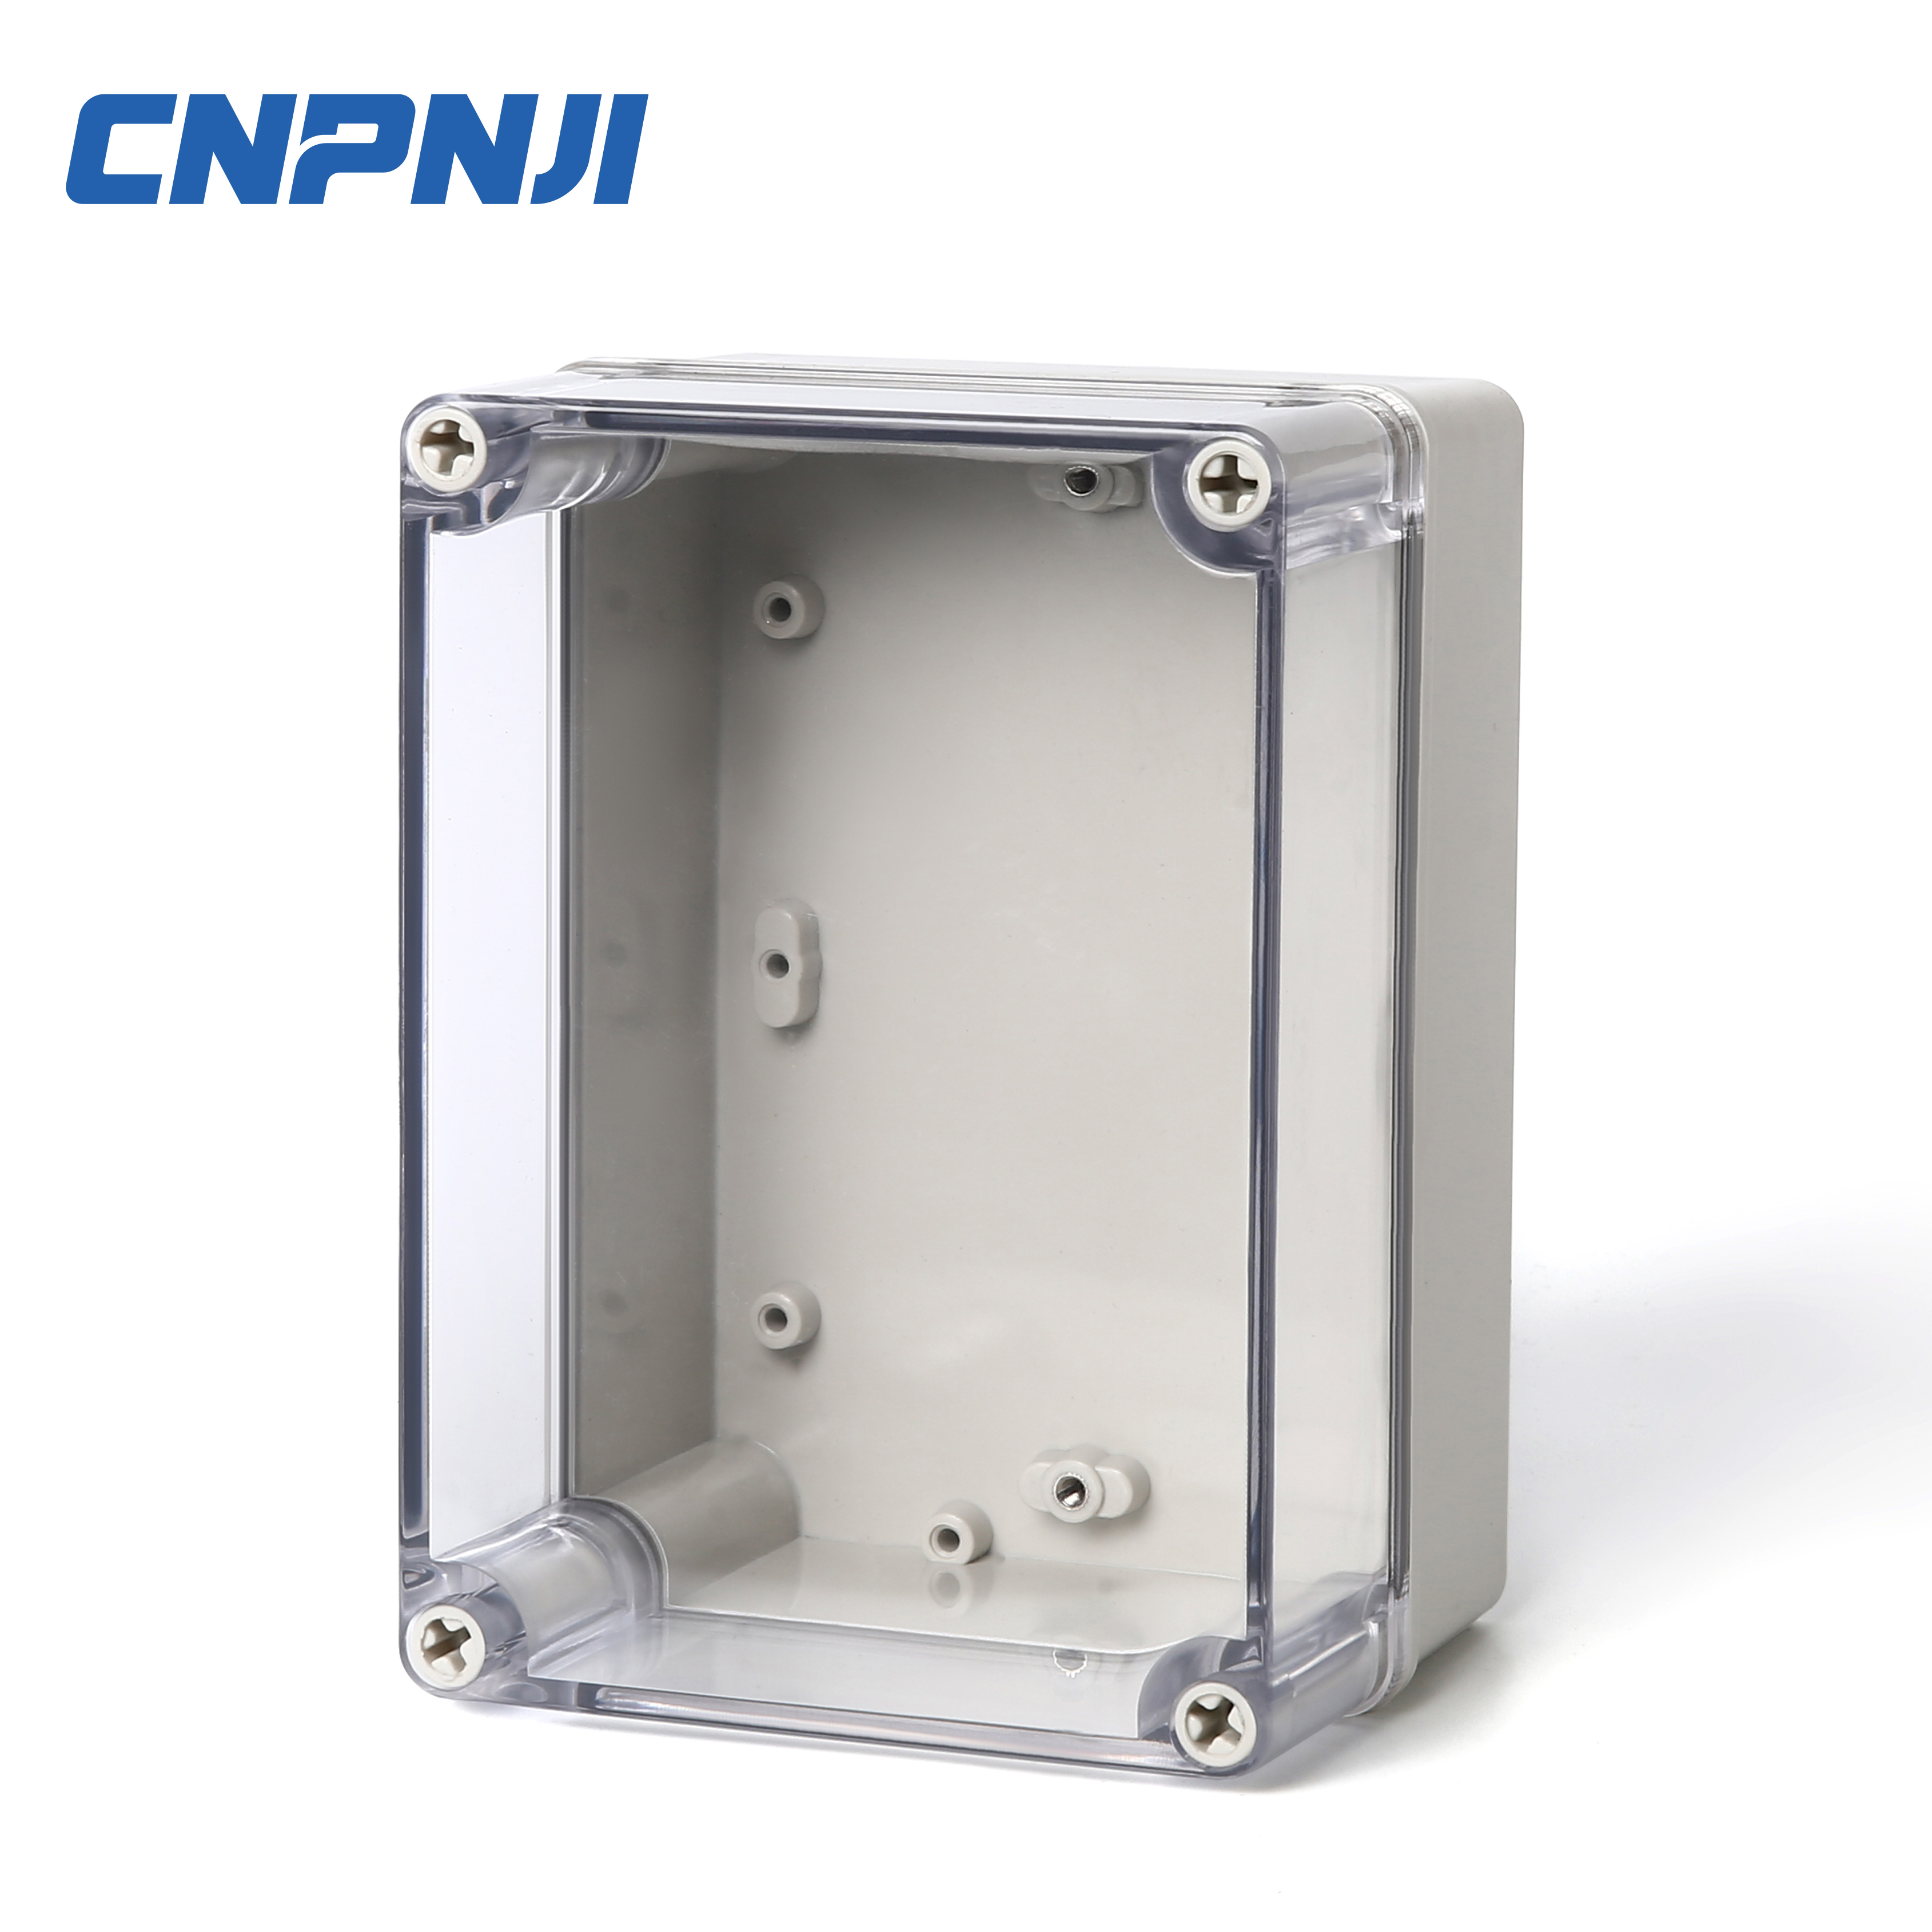 Waterproof Junction Box Materials Selection Guide